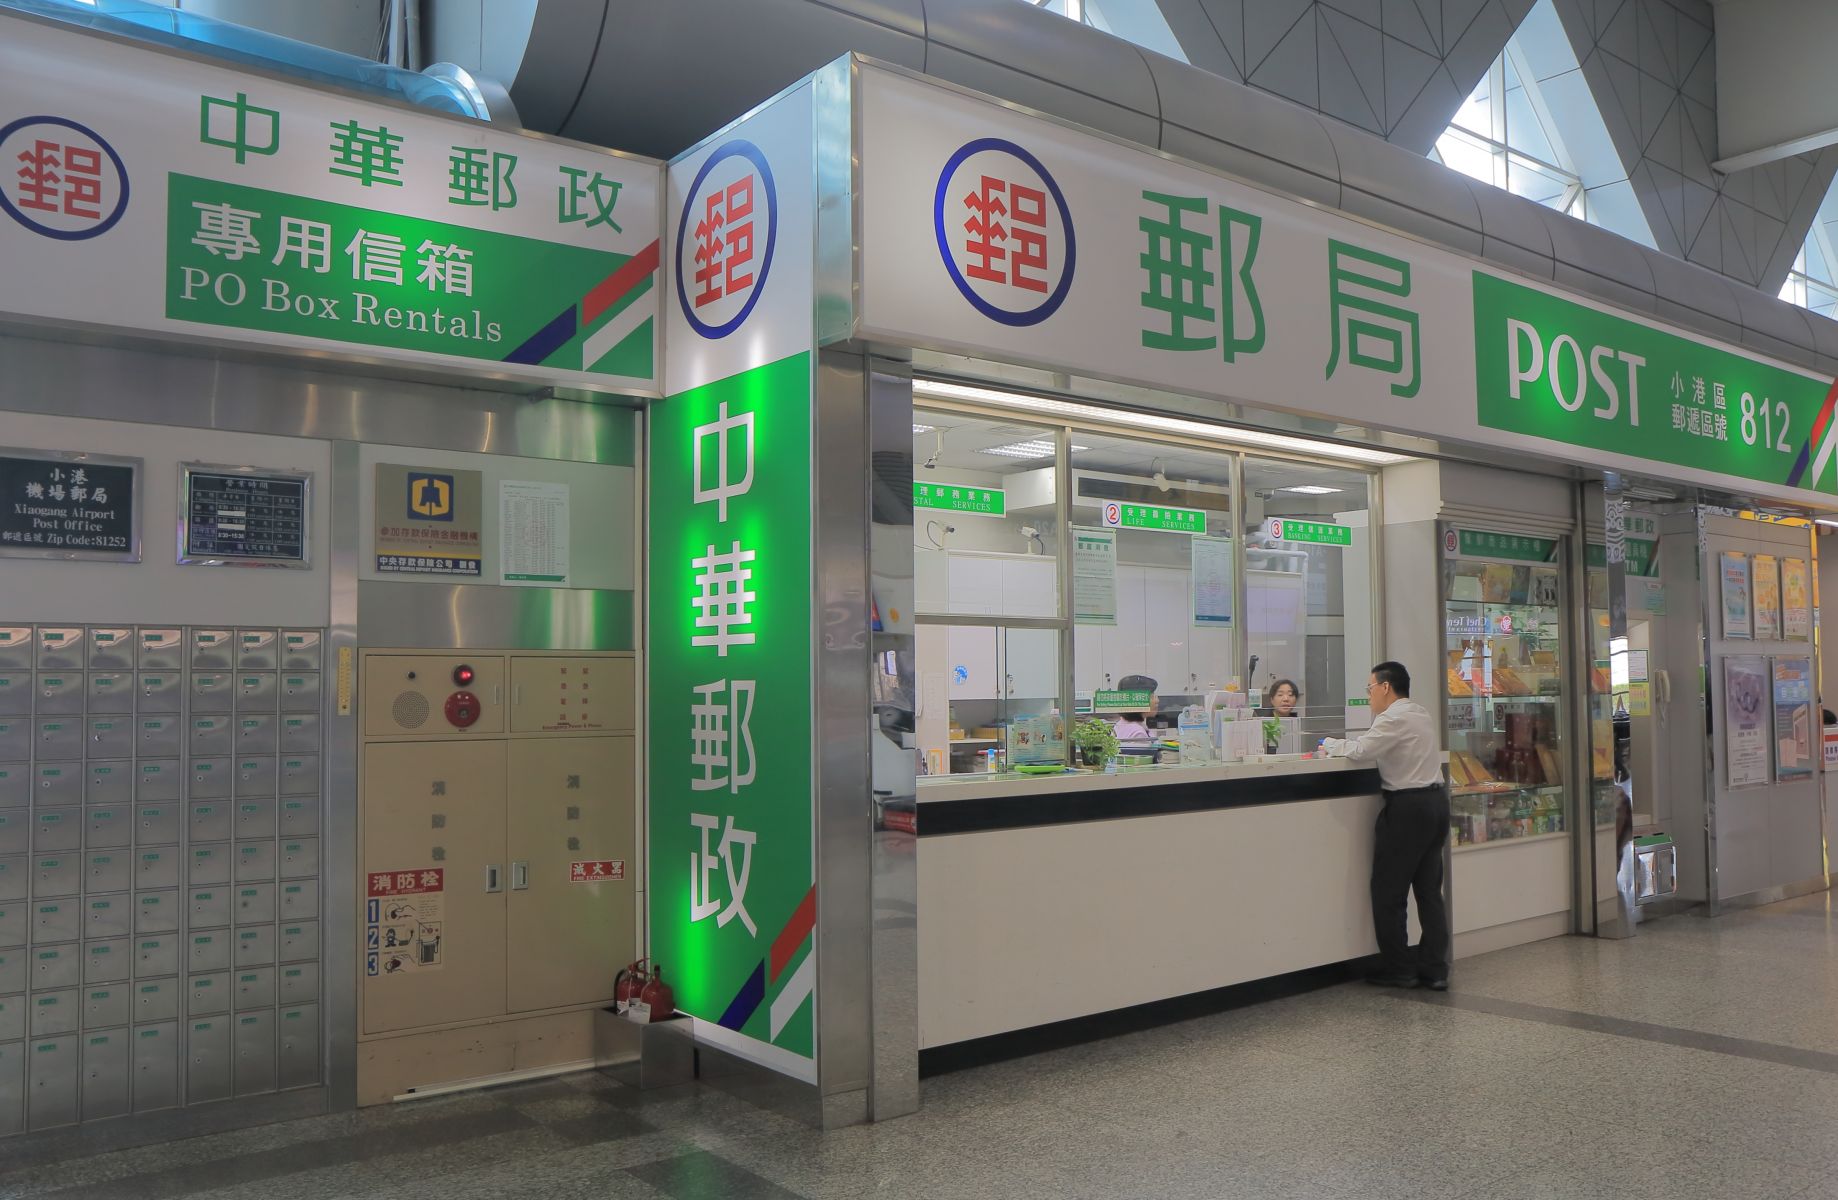 The post office ATMs will add multiple languages for foreigners and migrant workers in Taiwan. Photo/Retrieved from TPG Images Gallery